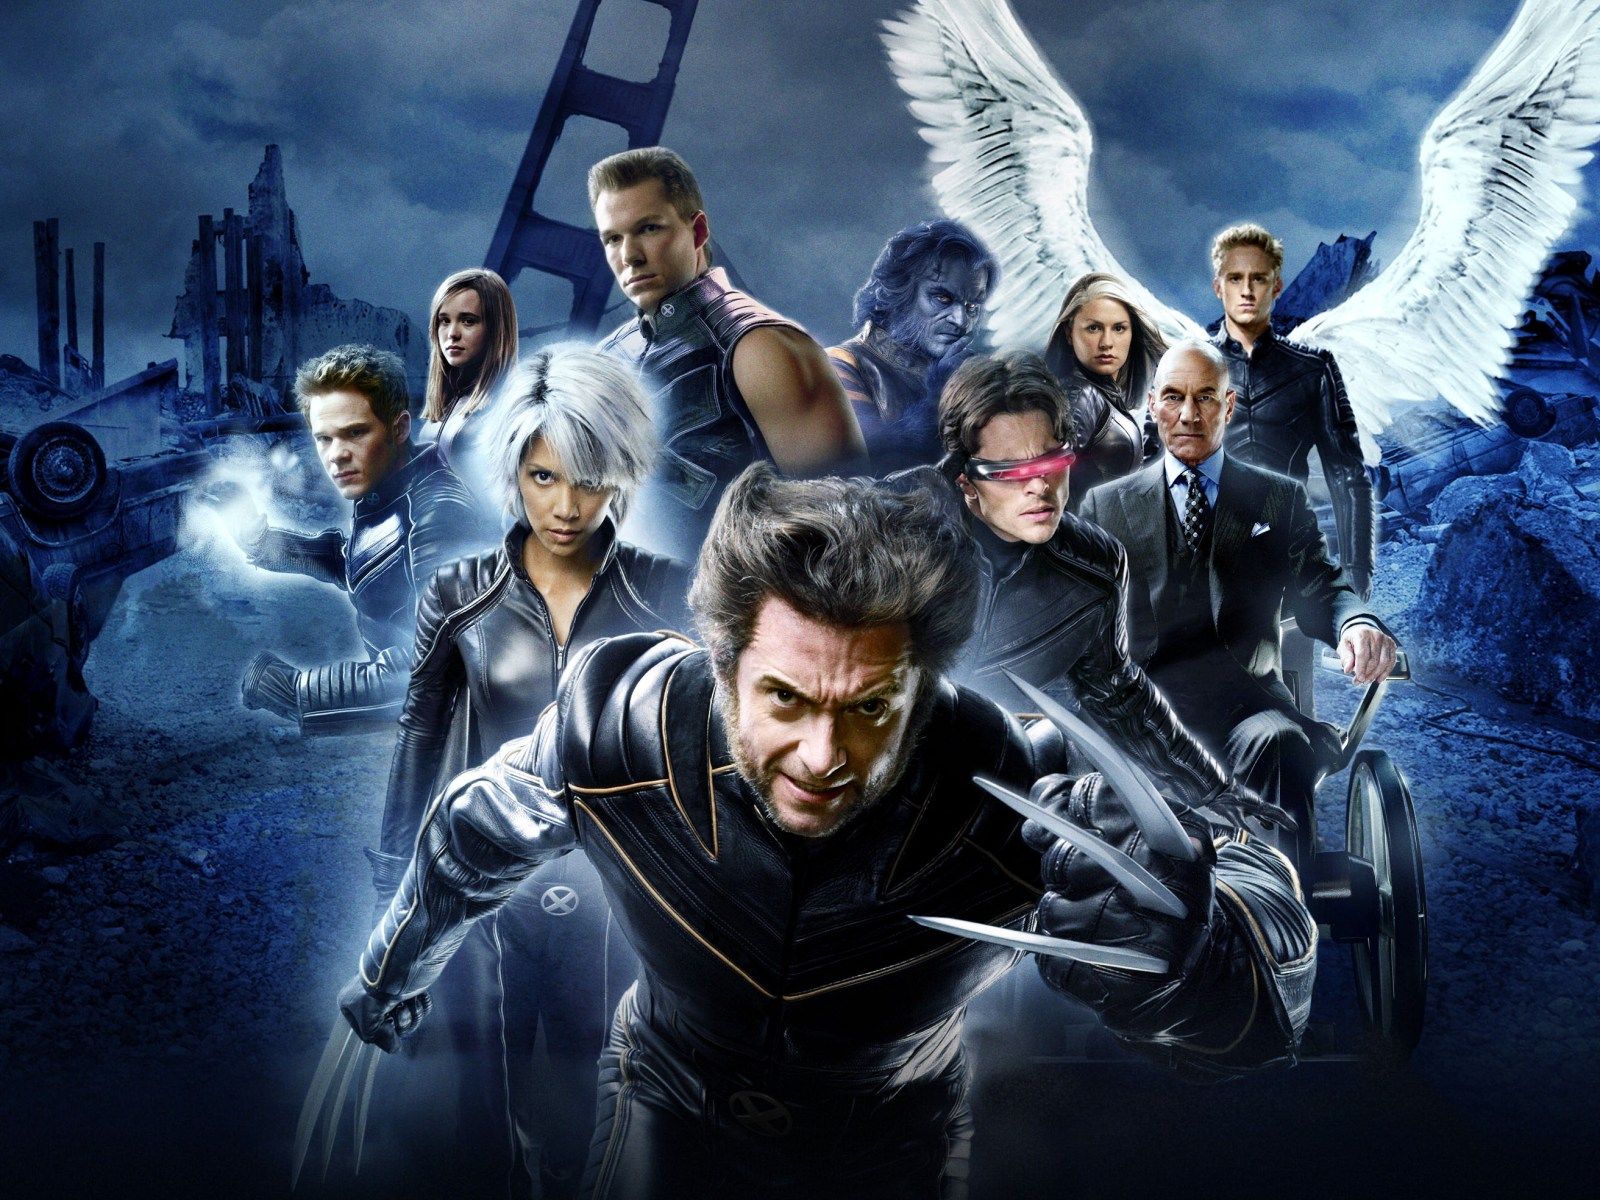 X-Men: The Last Stand wallpapers and images - wallpapers, pictures ...